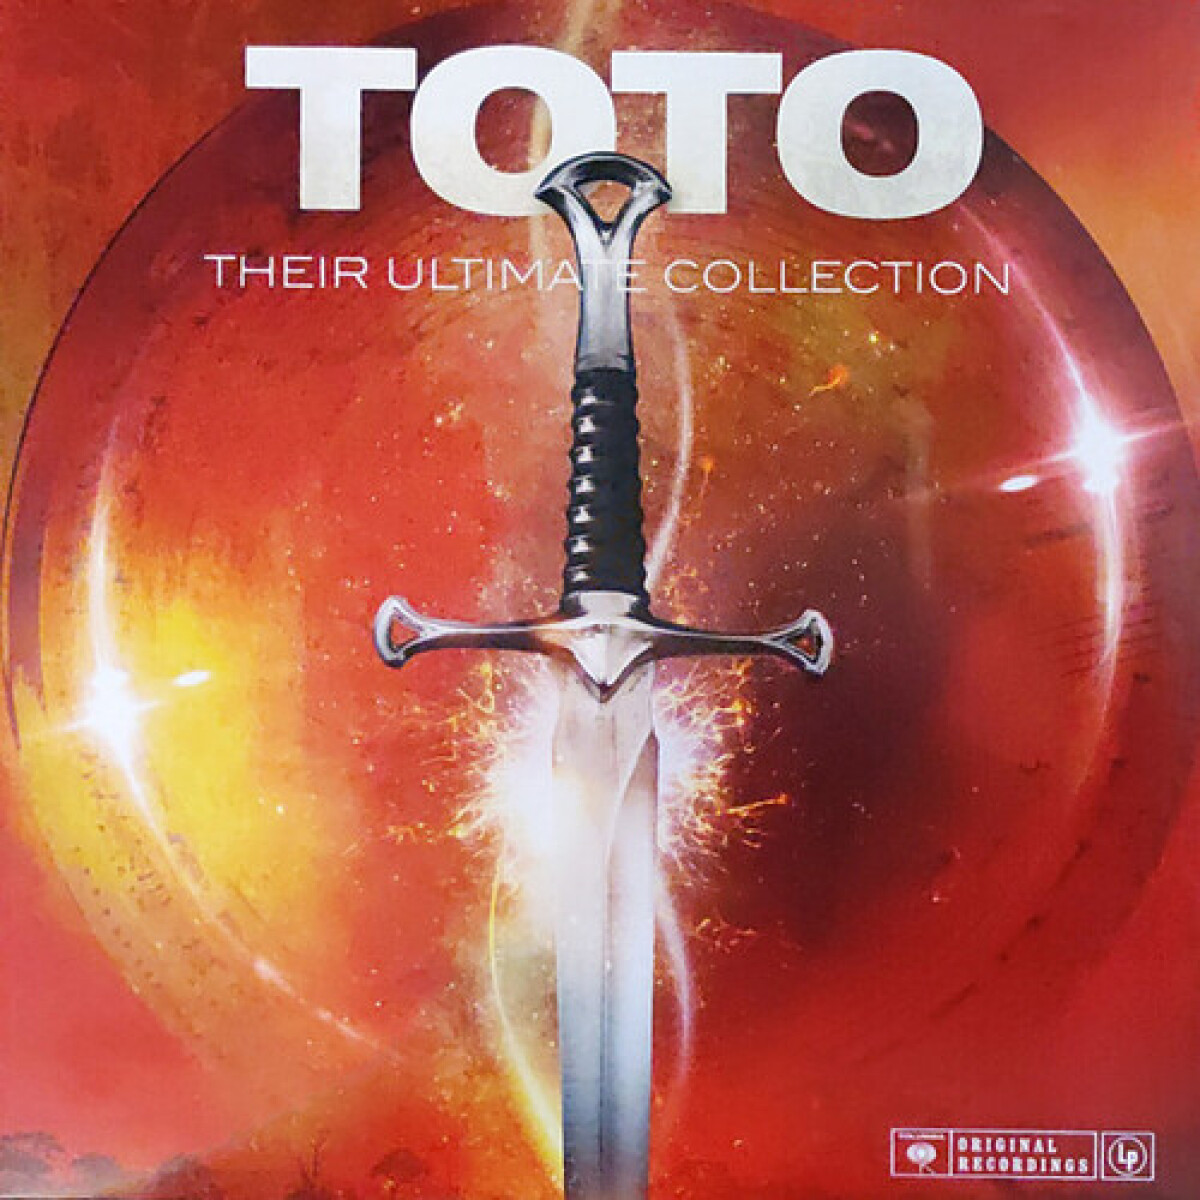 Toto - Their Ultimate Collection - Vinilo 